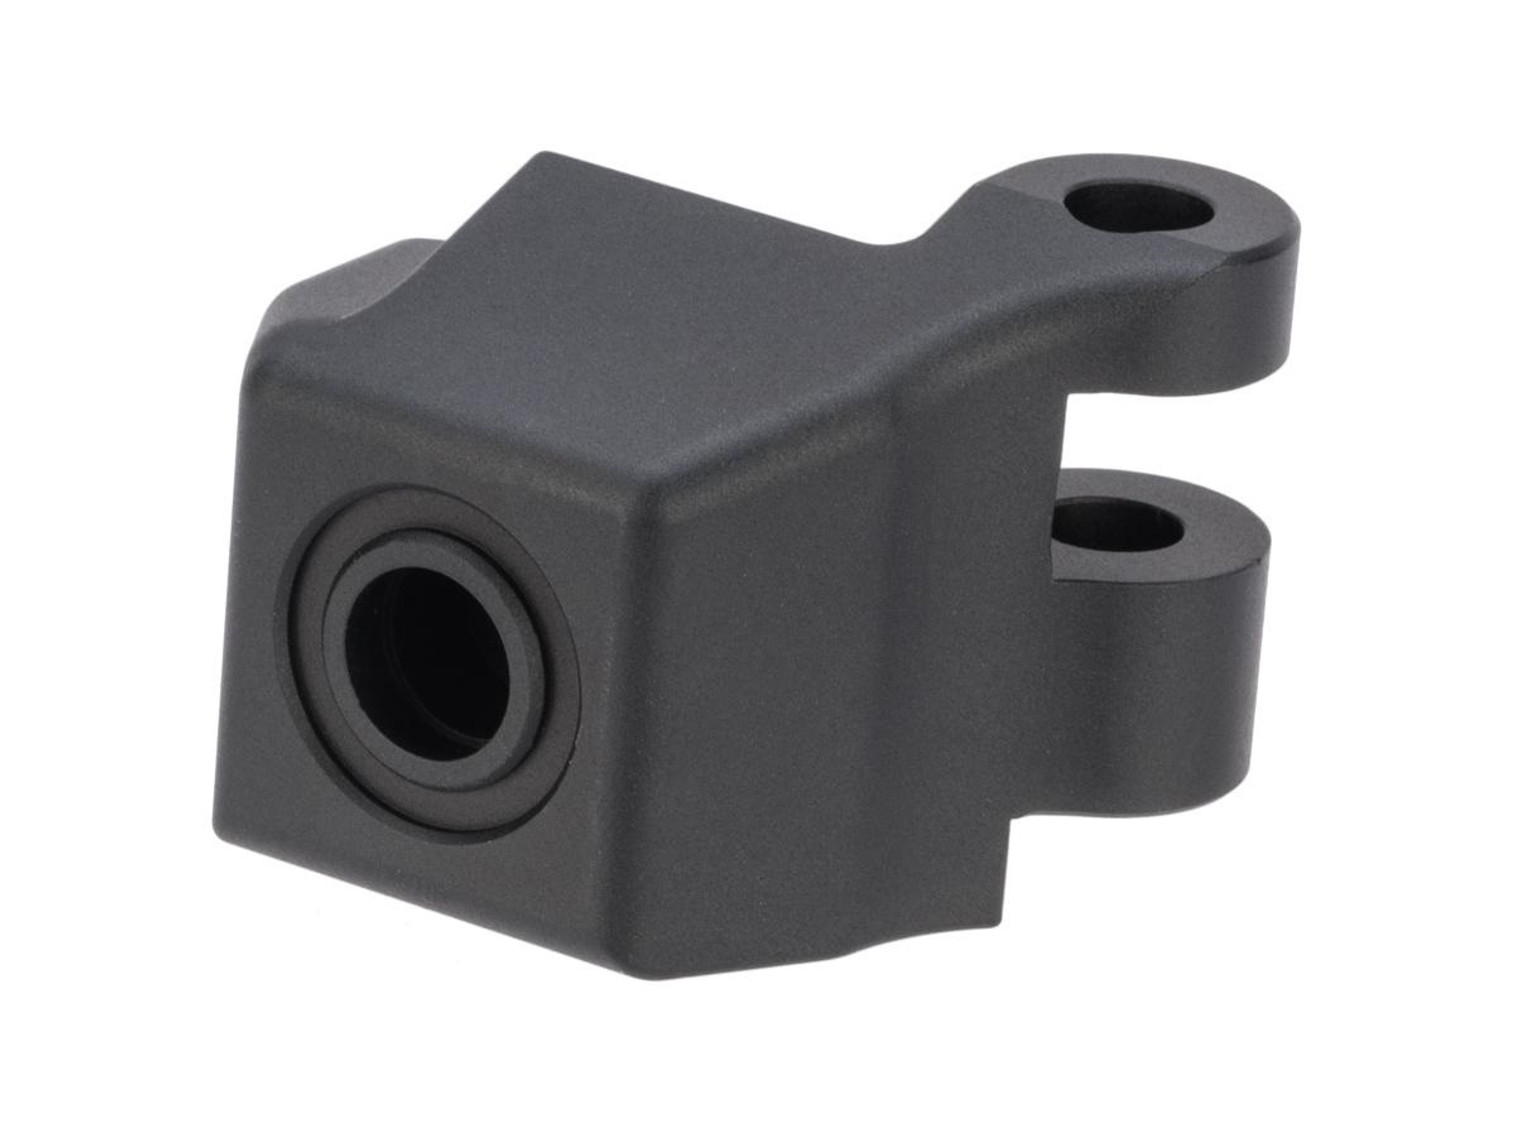 LAYLAX QD Sling Swivel Tail End for Krytac KRISS Vector Airsoft AEG
